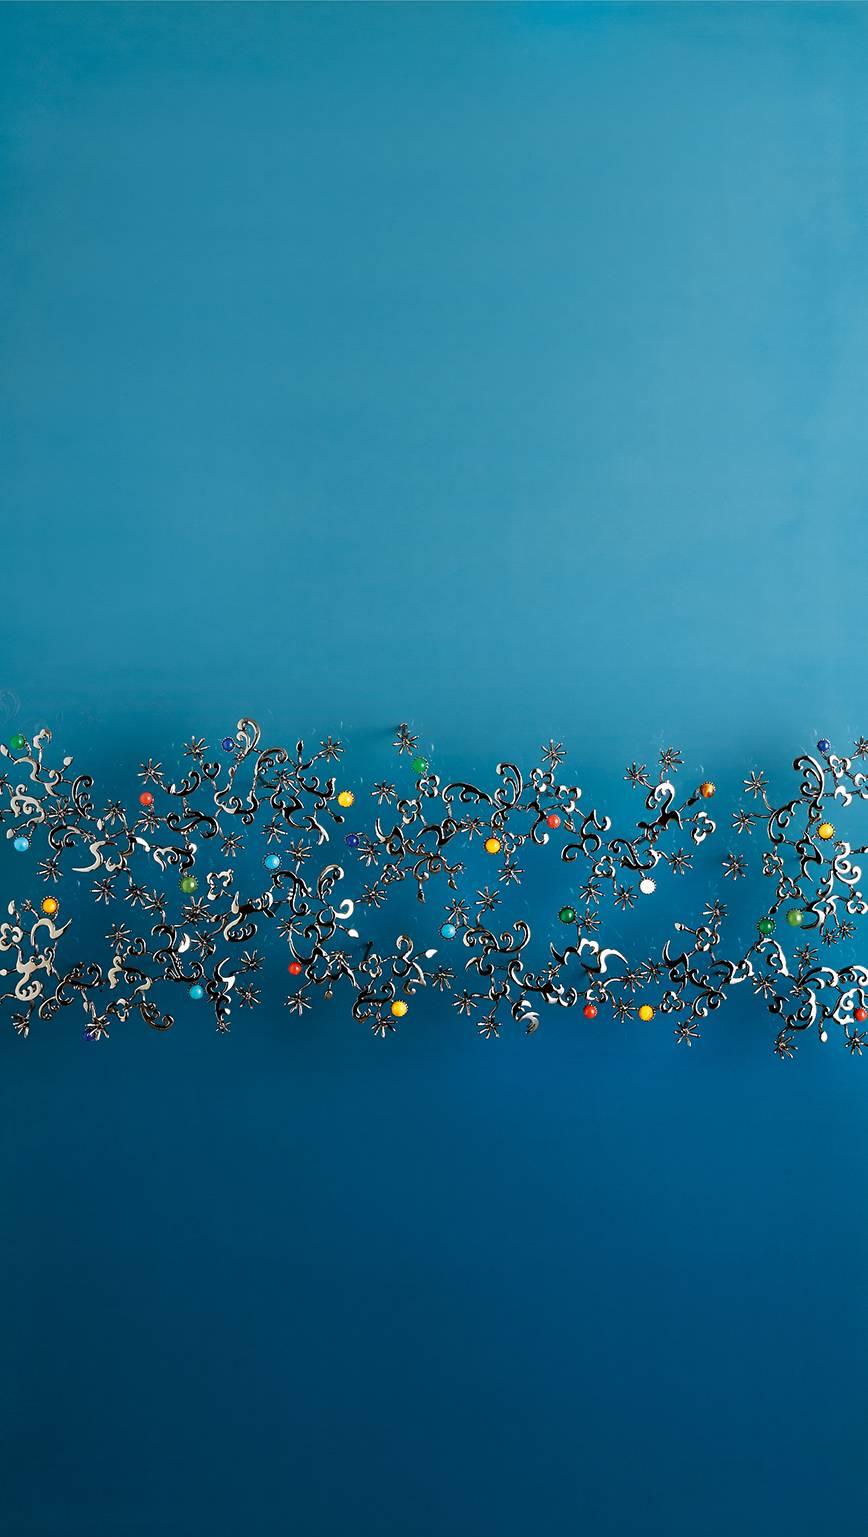 Sky, sea and poem 4 - Painting by Rim Chae